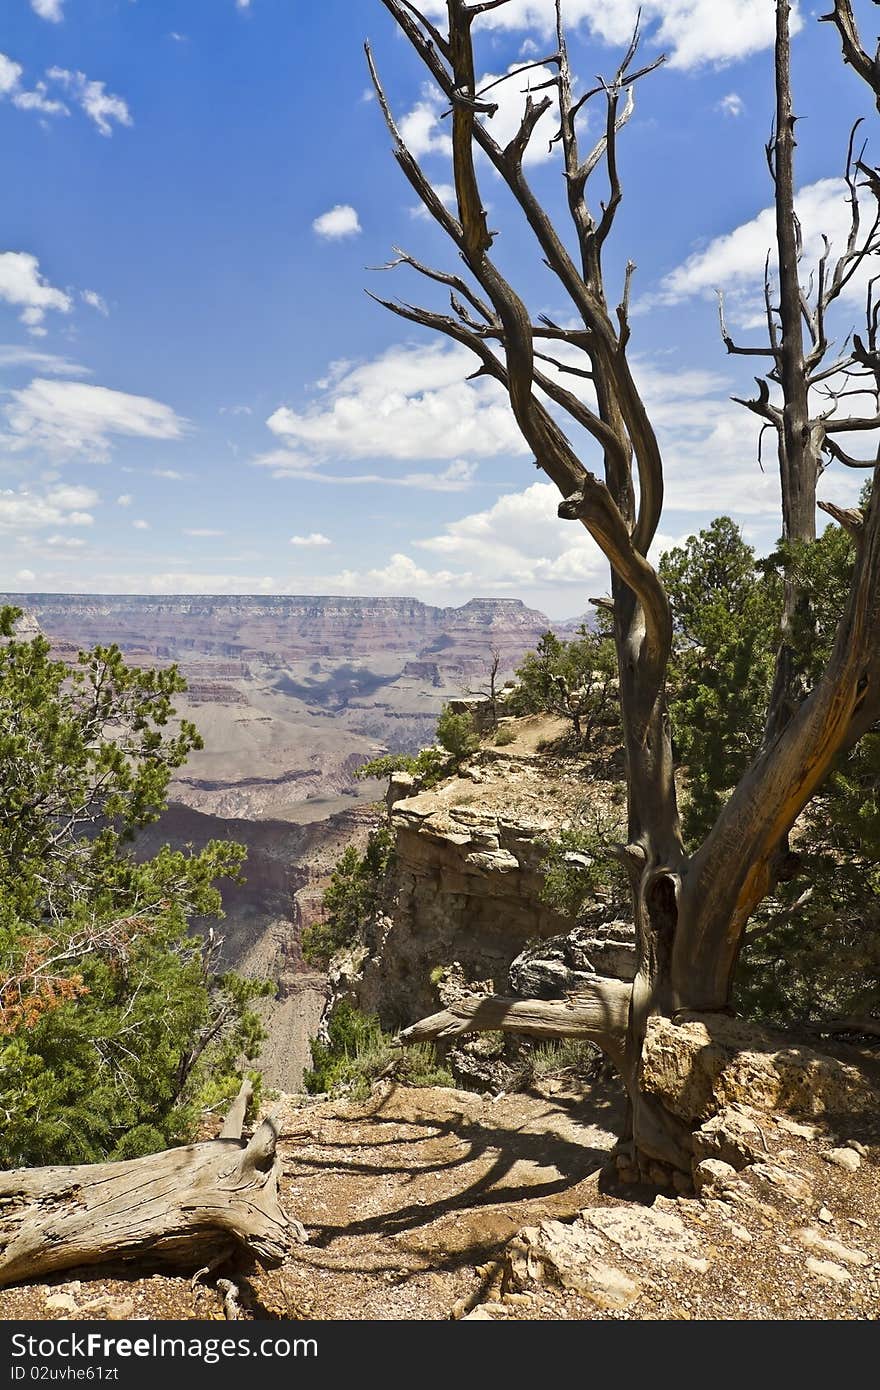 Lonely tree over the grand canyon in arizona. Lonely tree over the grand canyon in arizona